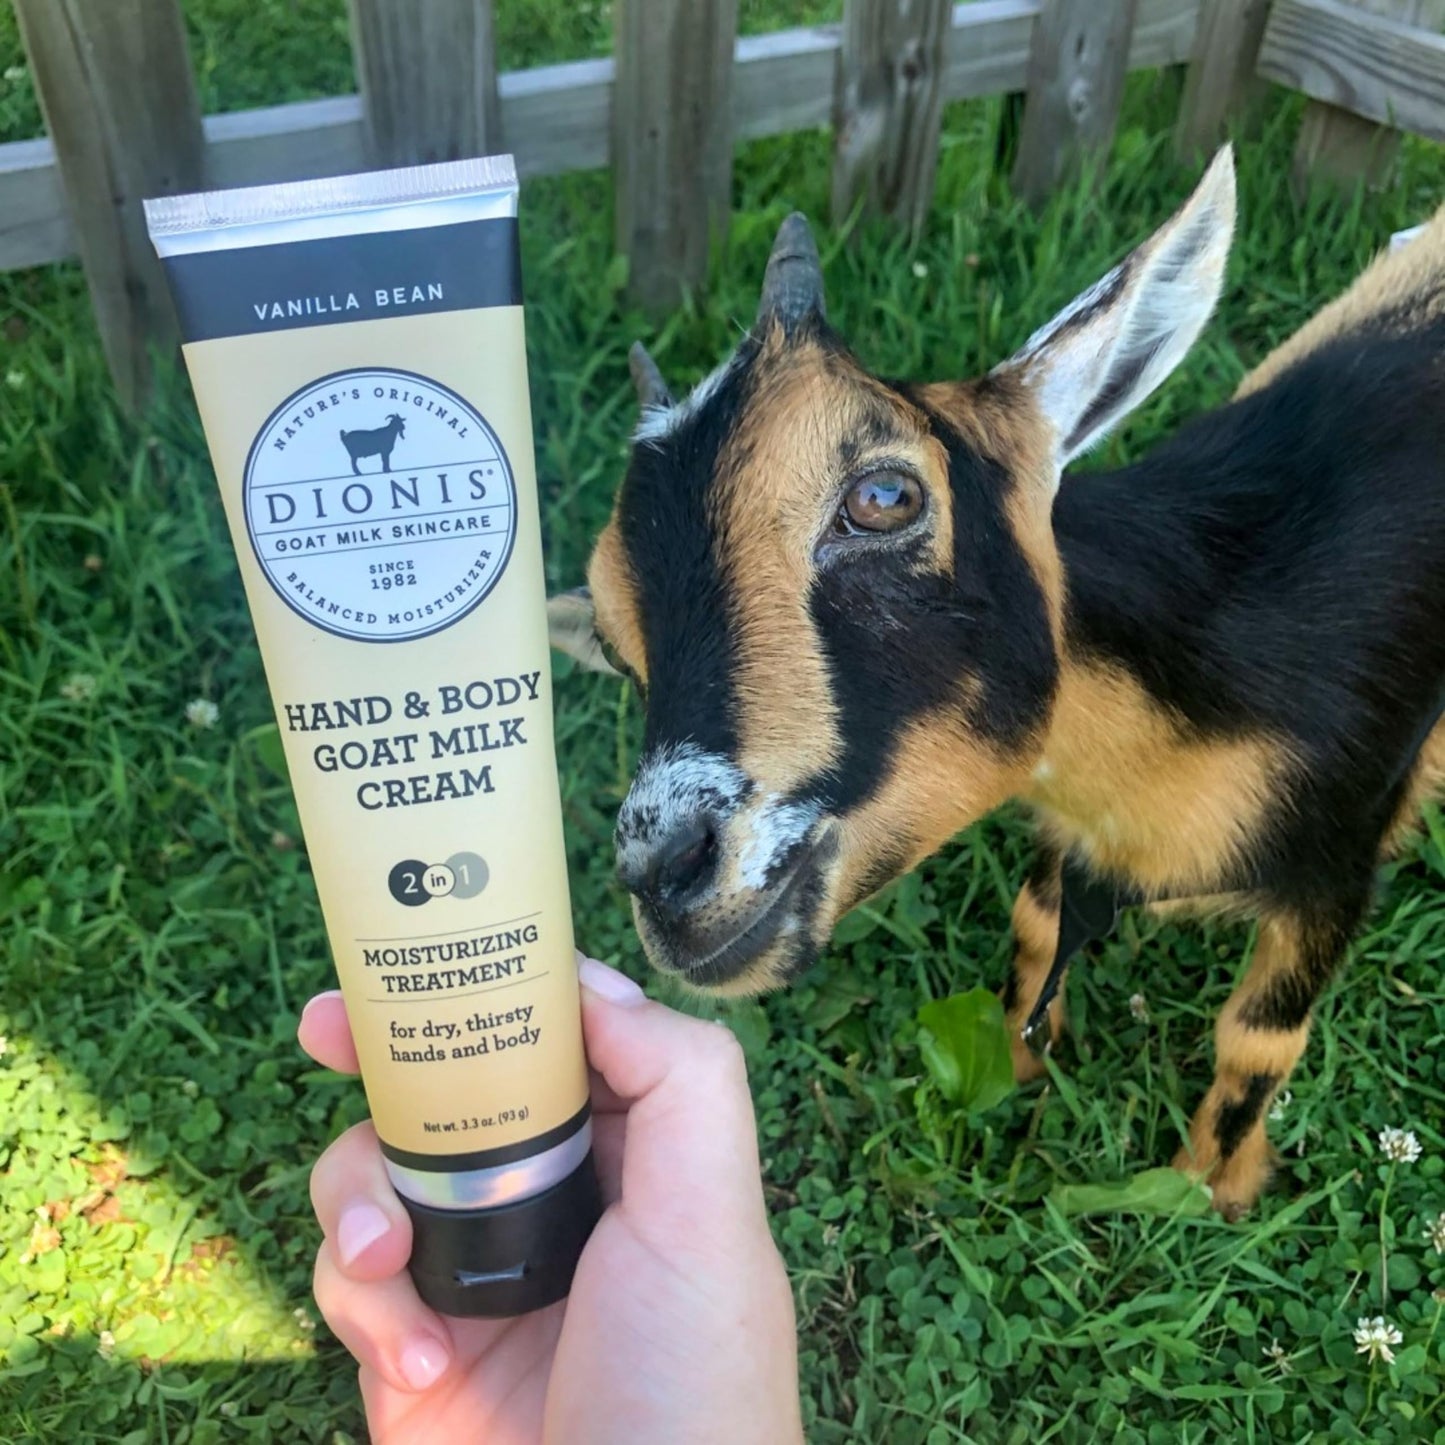 Dionis - Goat Milk Skincare Vanilla Bean Scented Hand & Body Cream (3.3 oz) - Made in the USA - Cruelty-free and Paraben-free